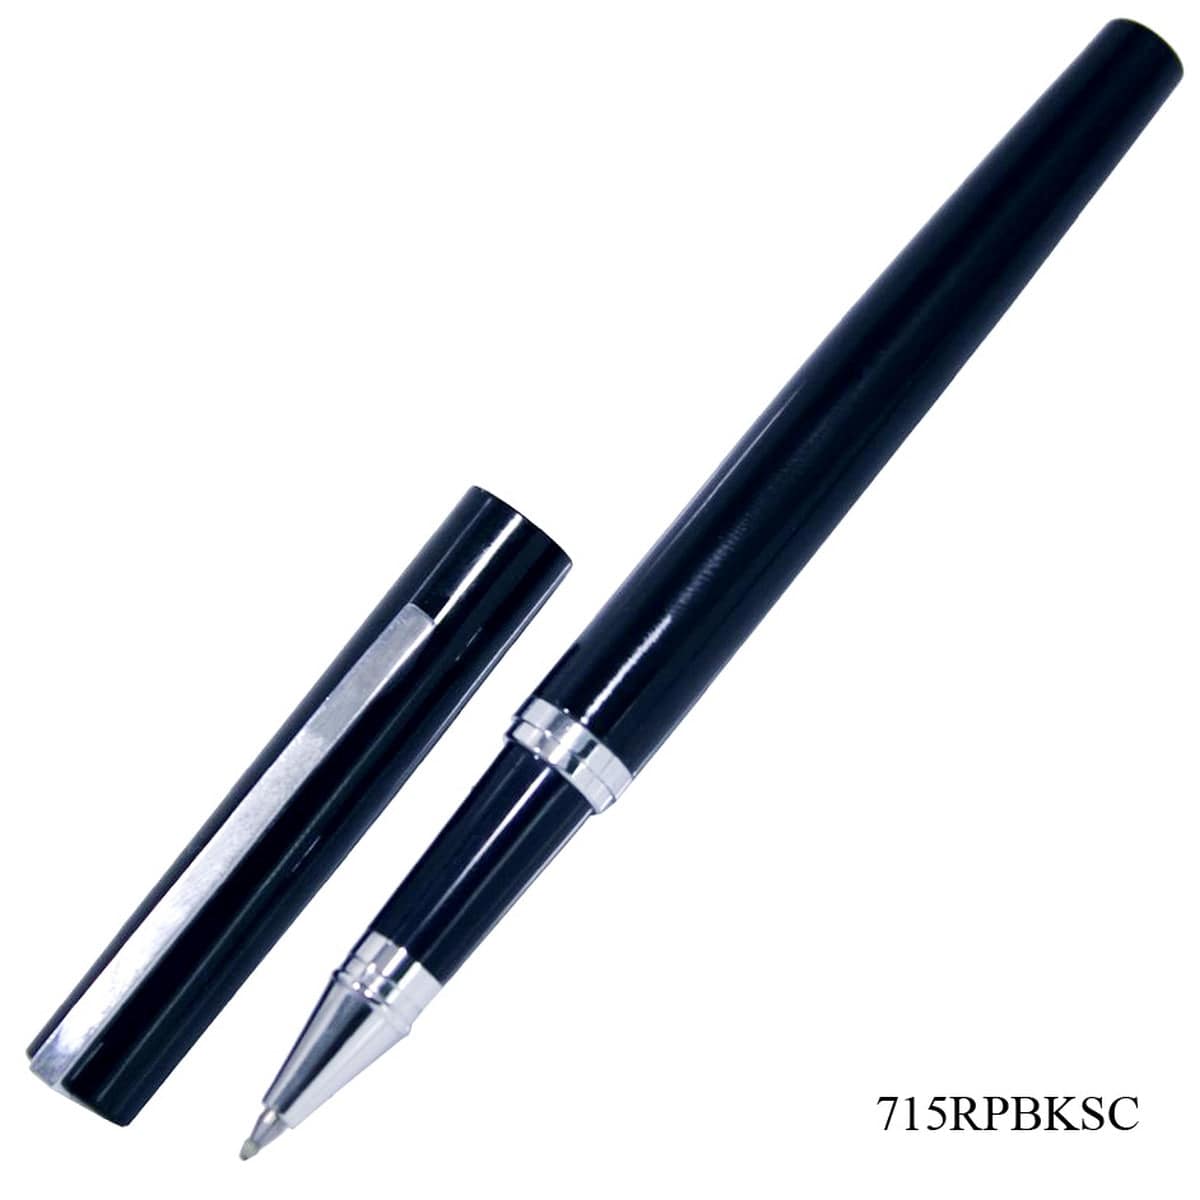 jags-mumbai Roller Pens Elevate Your Writing Experience with the Roller Pen Black Silver Clip 715RPBKSC